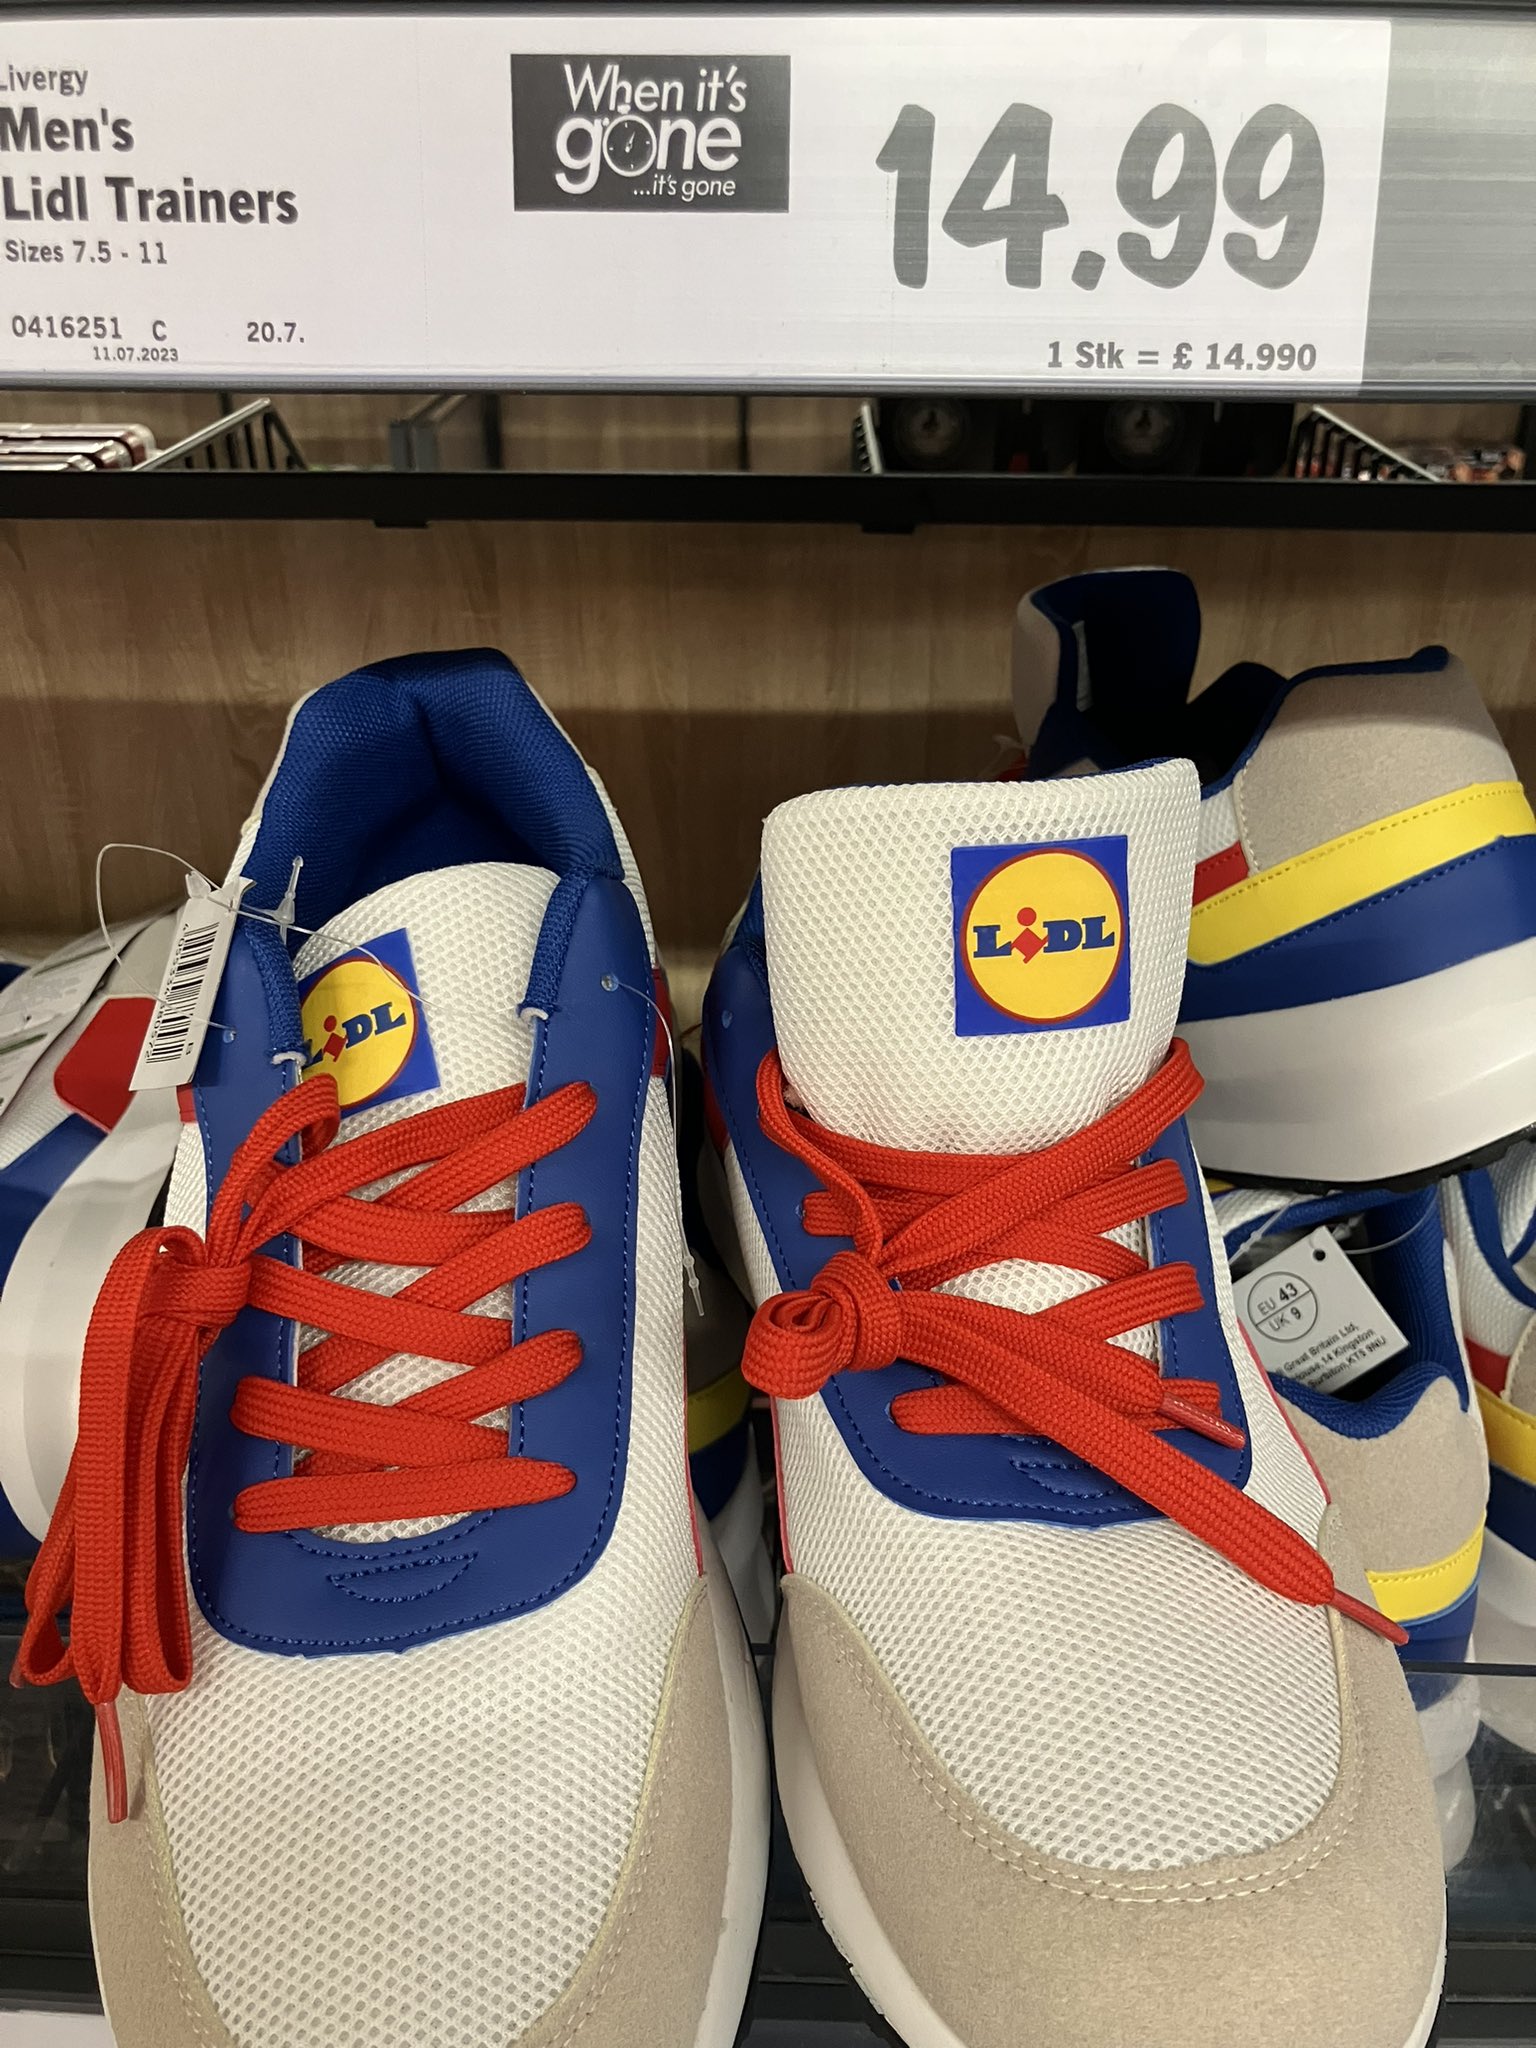 Uk-Size 9. LIDL shoes. Very good condition